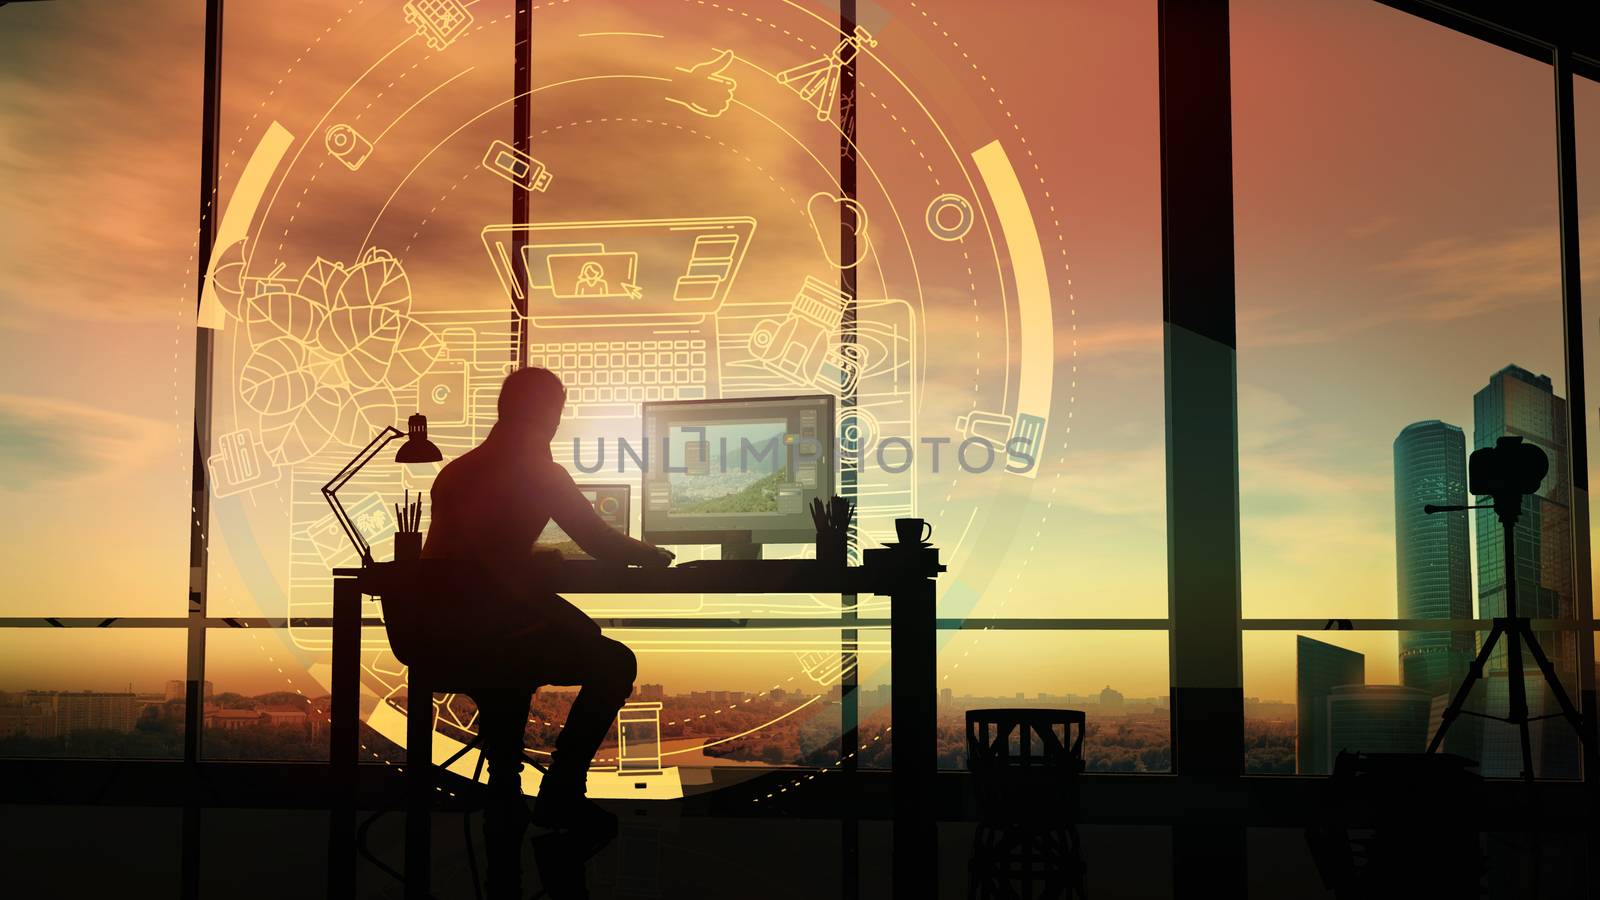 A photographer in his office looks at a virtual infographic against the backdrop of a bright sunset.